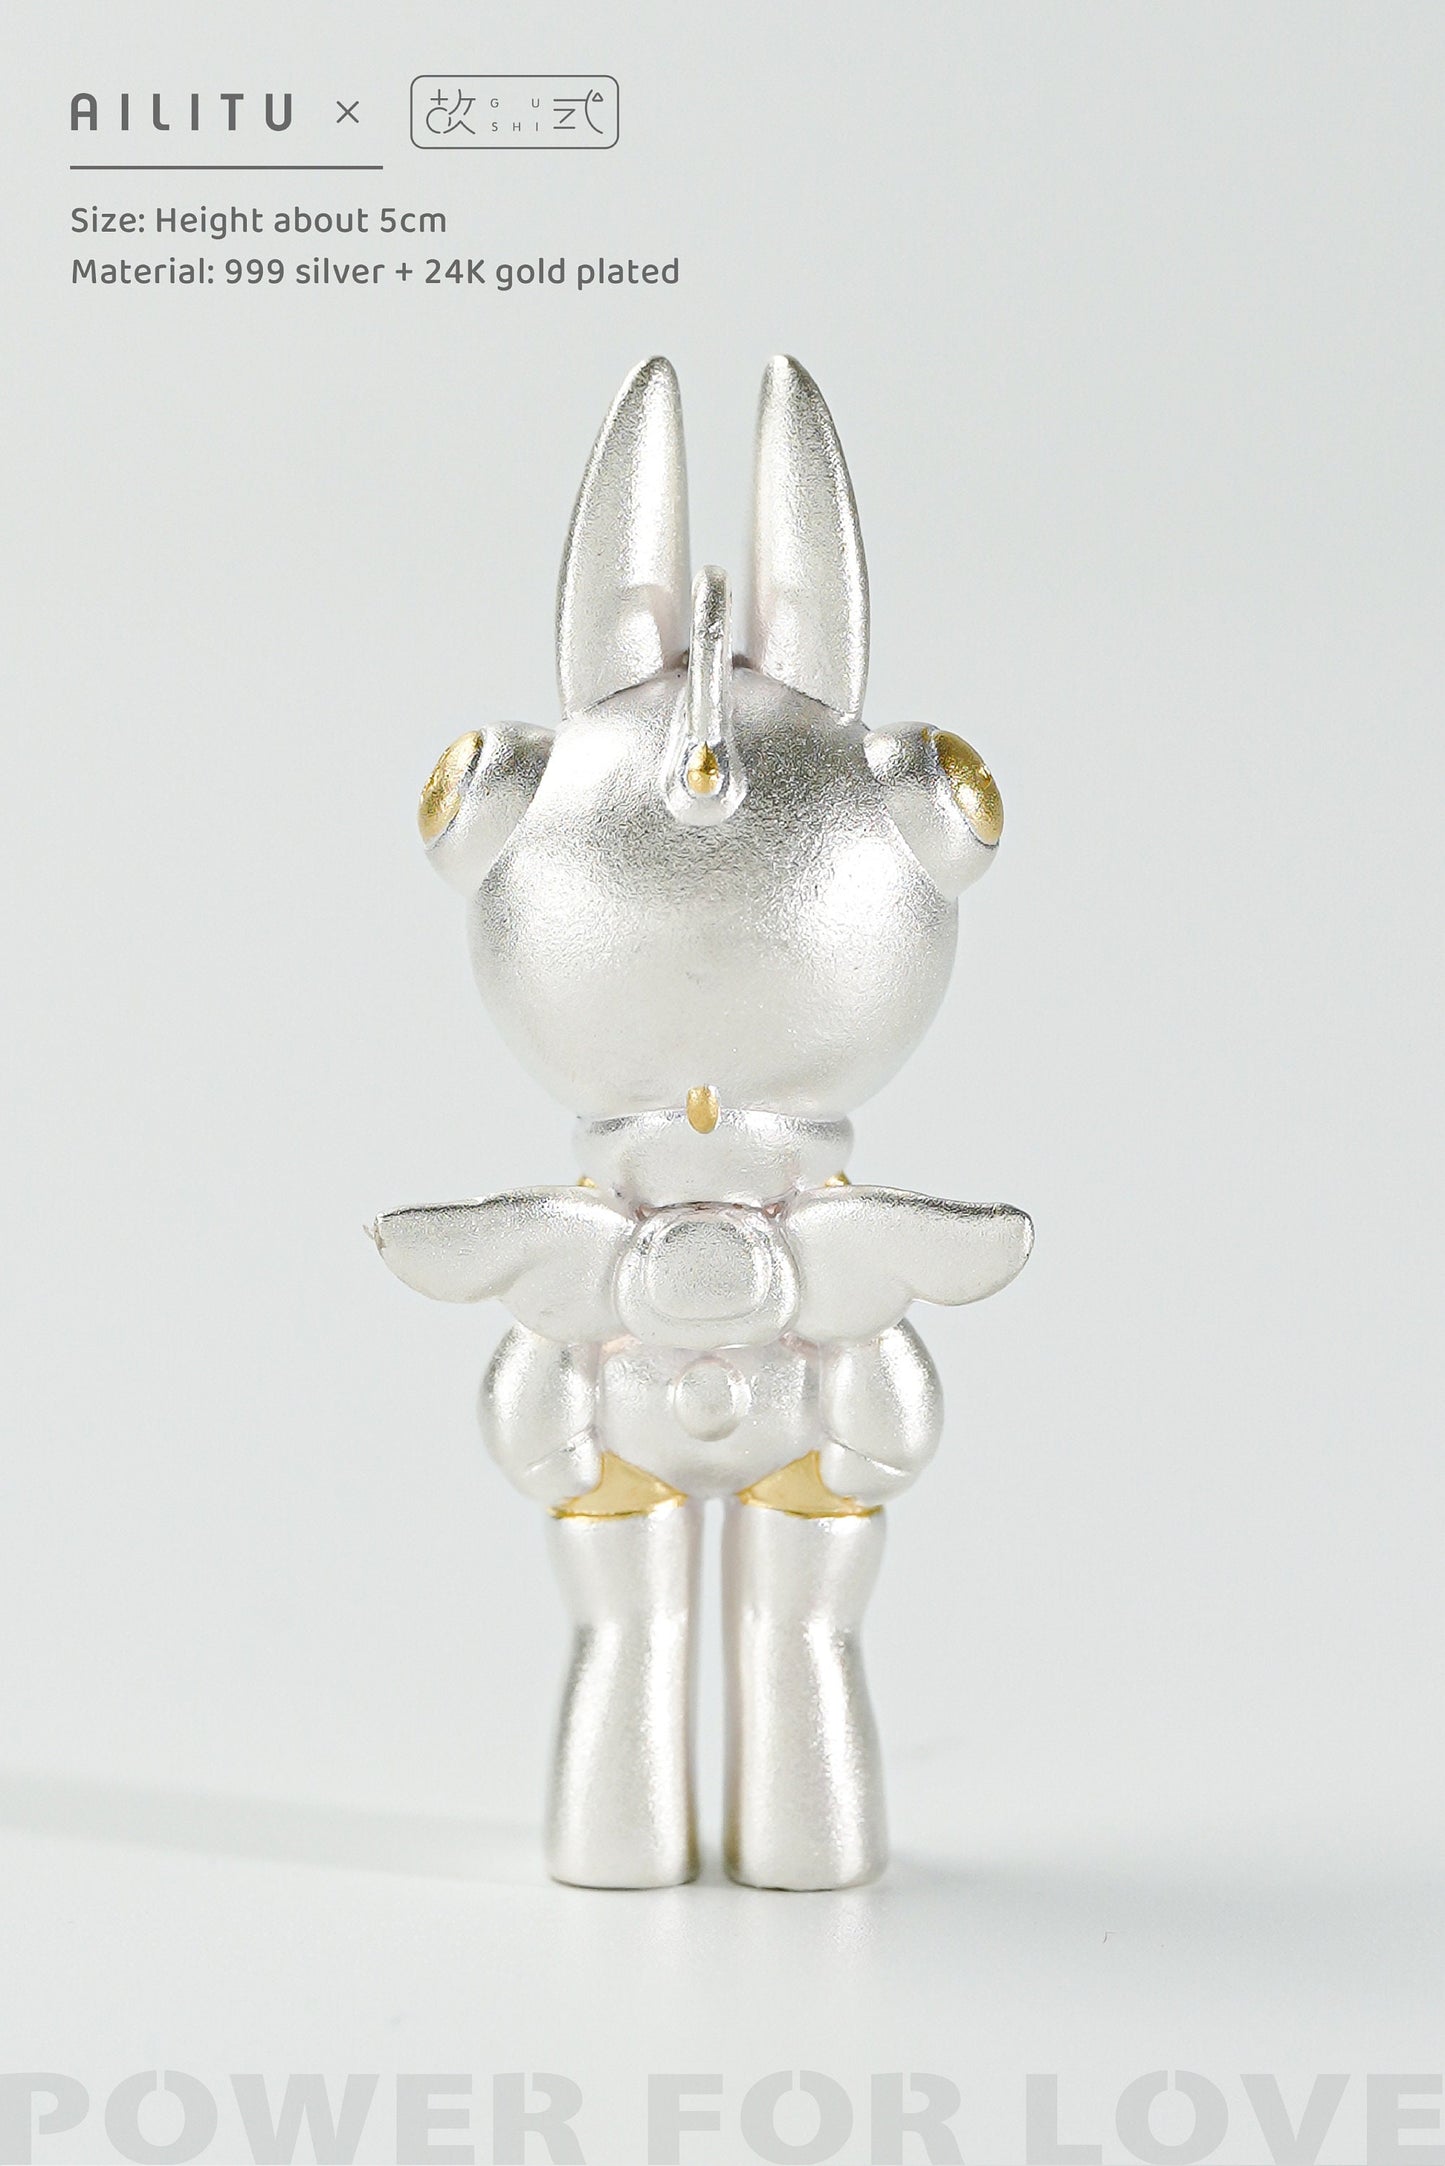 Jewelry/Silver Pendant/AILITU/Rabbit/Bunny/Pure Silver/24K Gold Plated/Height 1.97'' (5 cm)